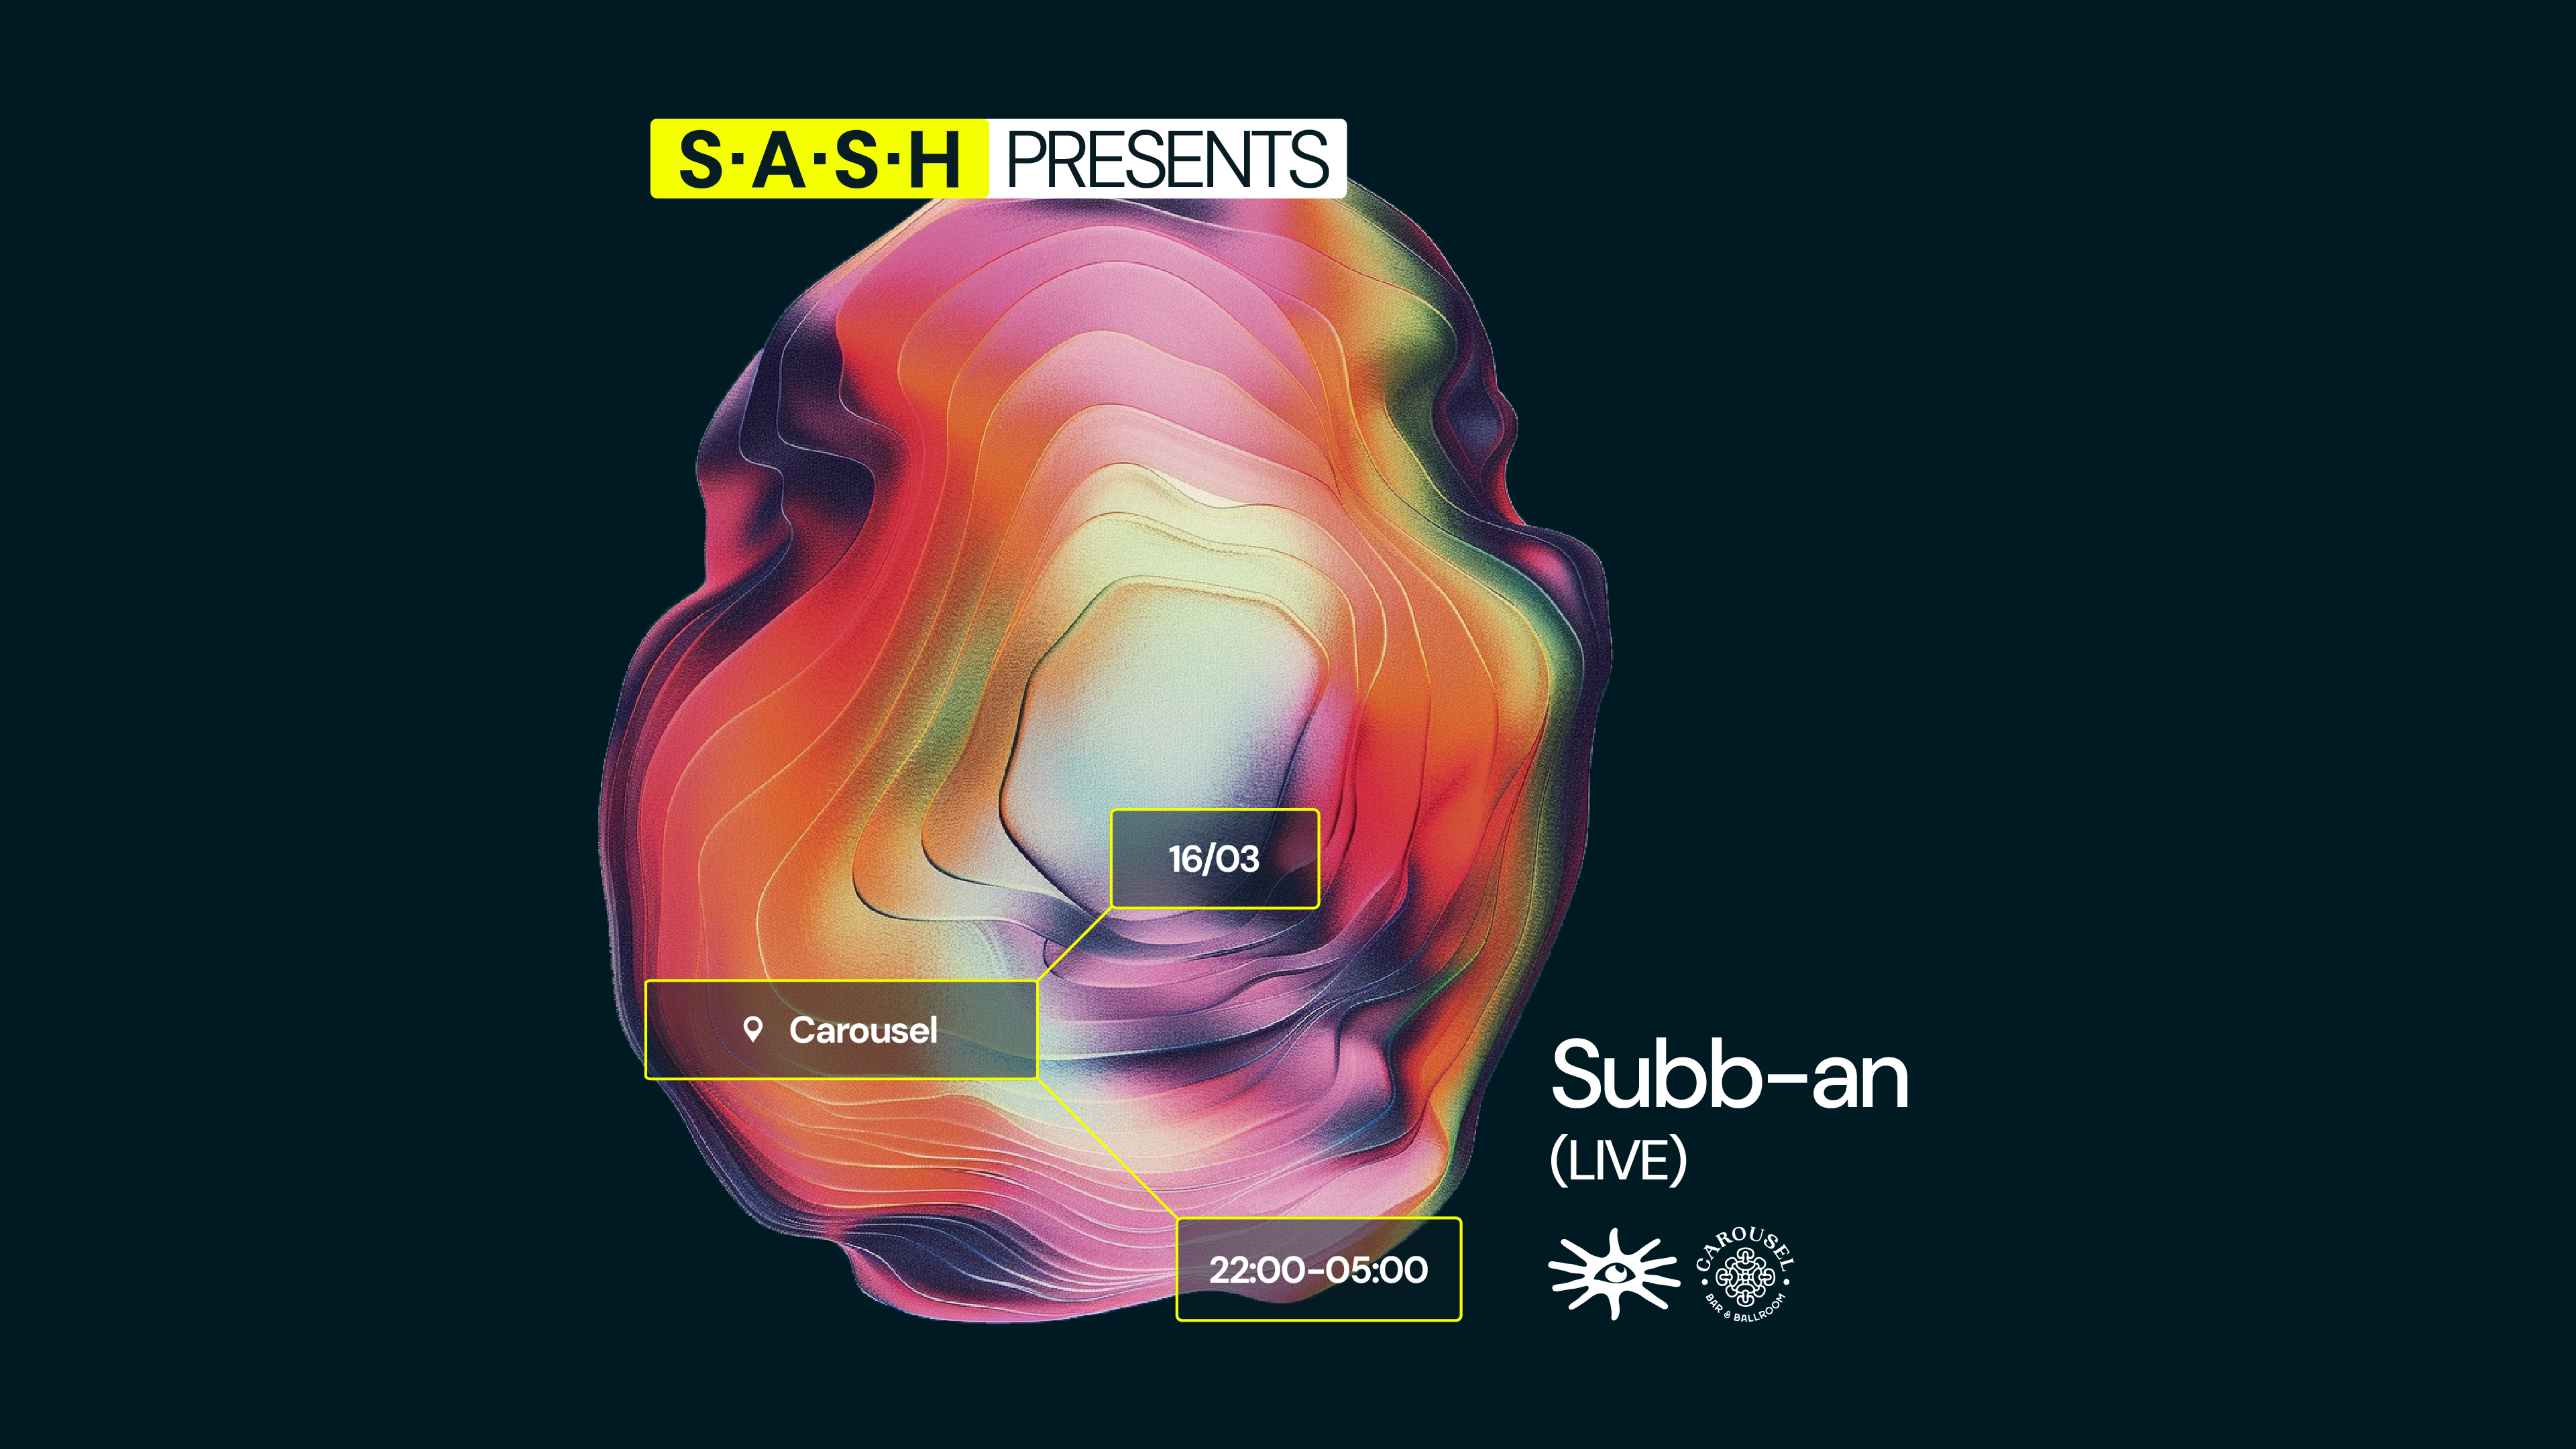 ★ S.A.S.H presents Subb-an (LIVE) ★ Saturday 16th March ★ - Página frontal